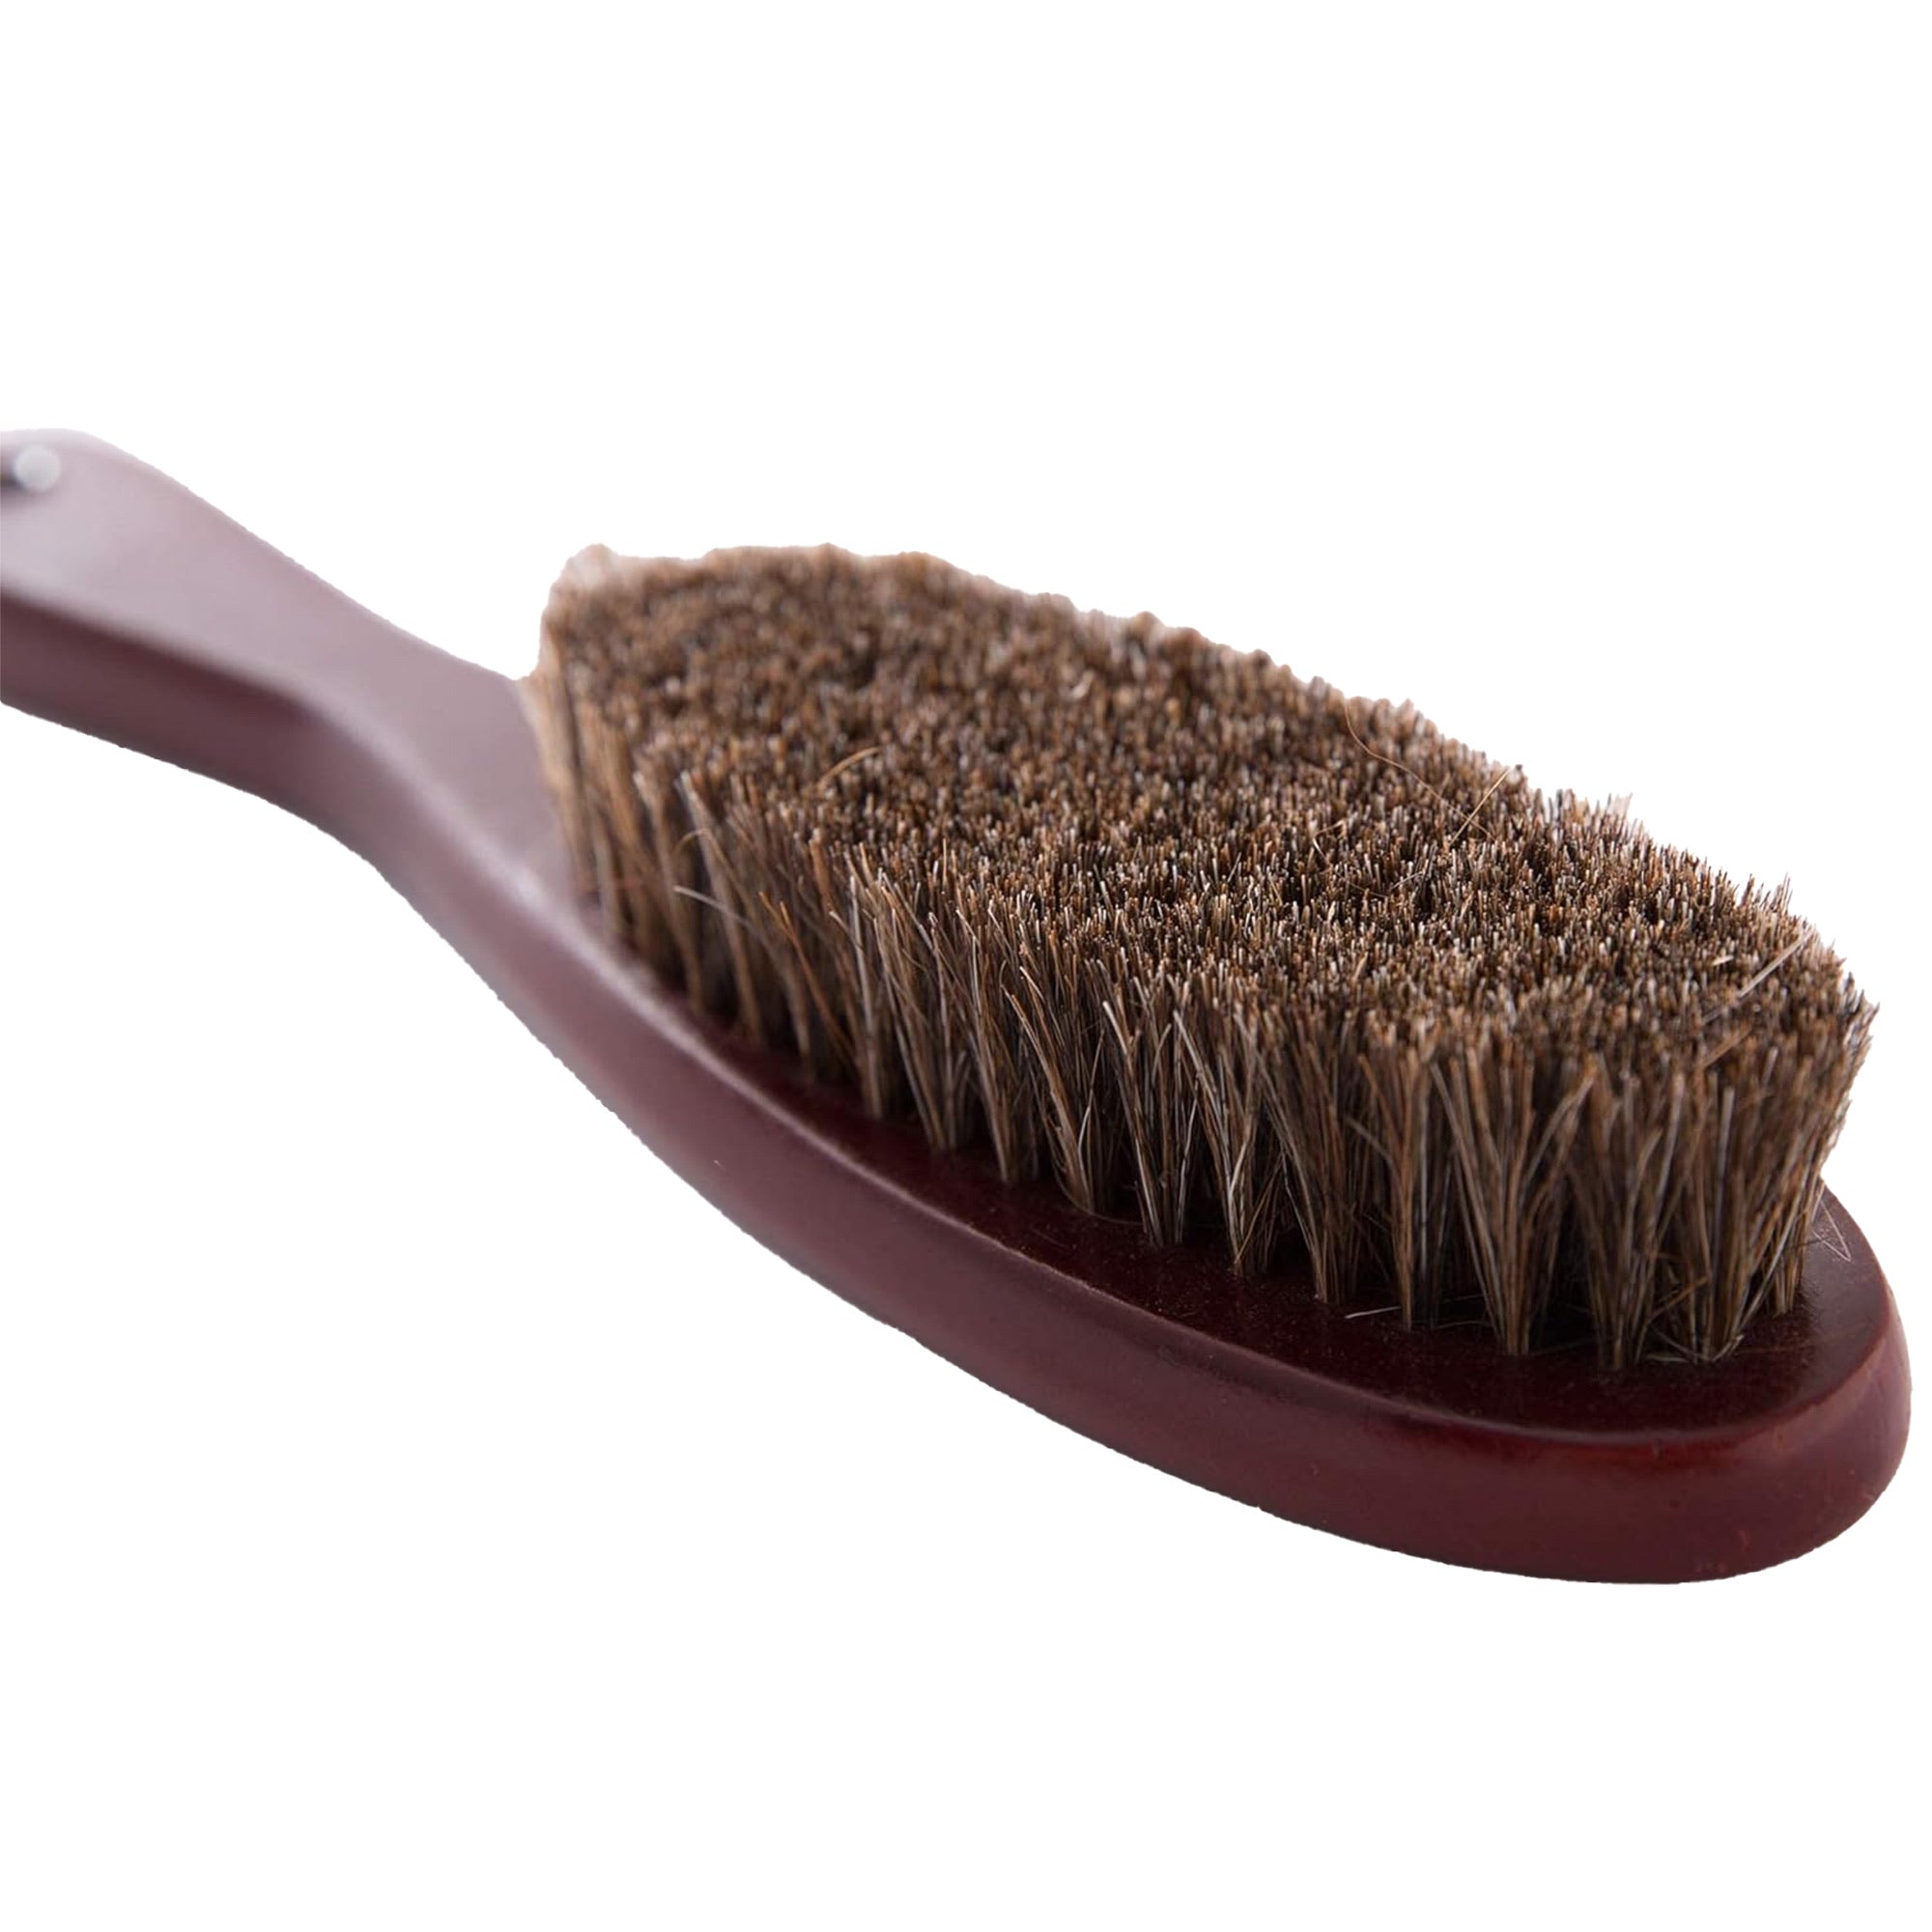 Eson - Fade Brush Long Horse Hair Comfort During Use 23x5cm (Red) - Eson Direct